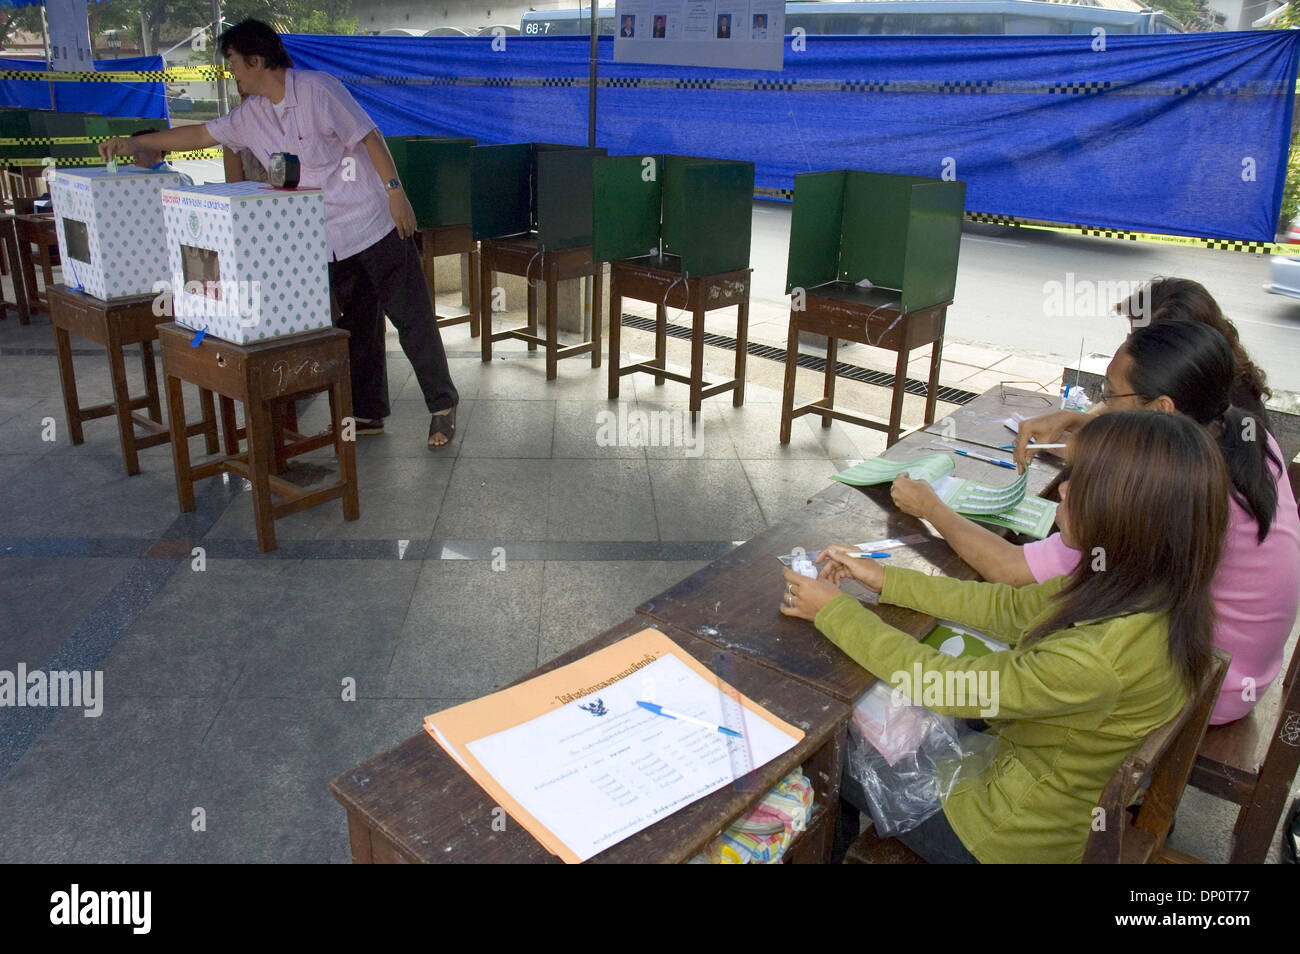 Apr 02, 2006; Bangkok, THAILAND; Voter drops their ballot into a ballot box. Voters have been urged by the opposition to vote 'No Vote' to discredit the Thai Rak Thai party and force a new government. Mandatory Credit: Photo by Ian Buswell/ZUMA Press. (©) Copyright 2006 by Ian Buswell Stock Photo